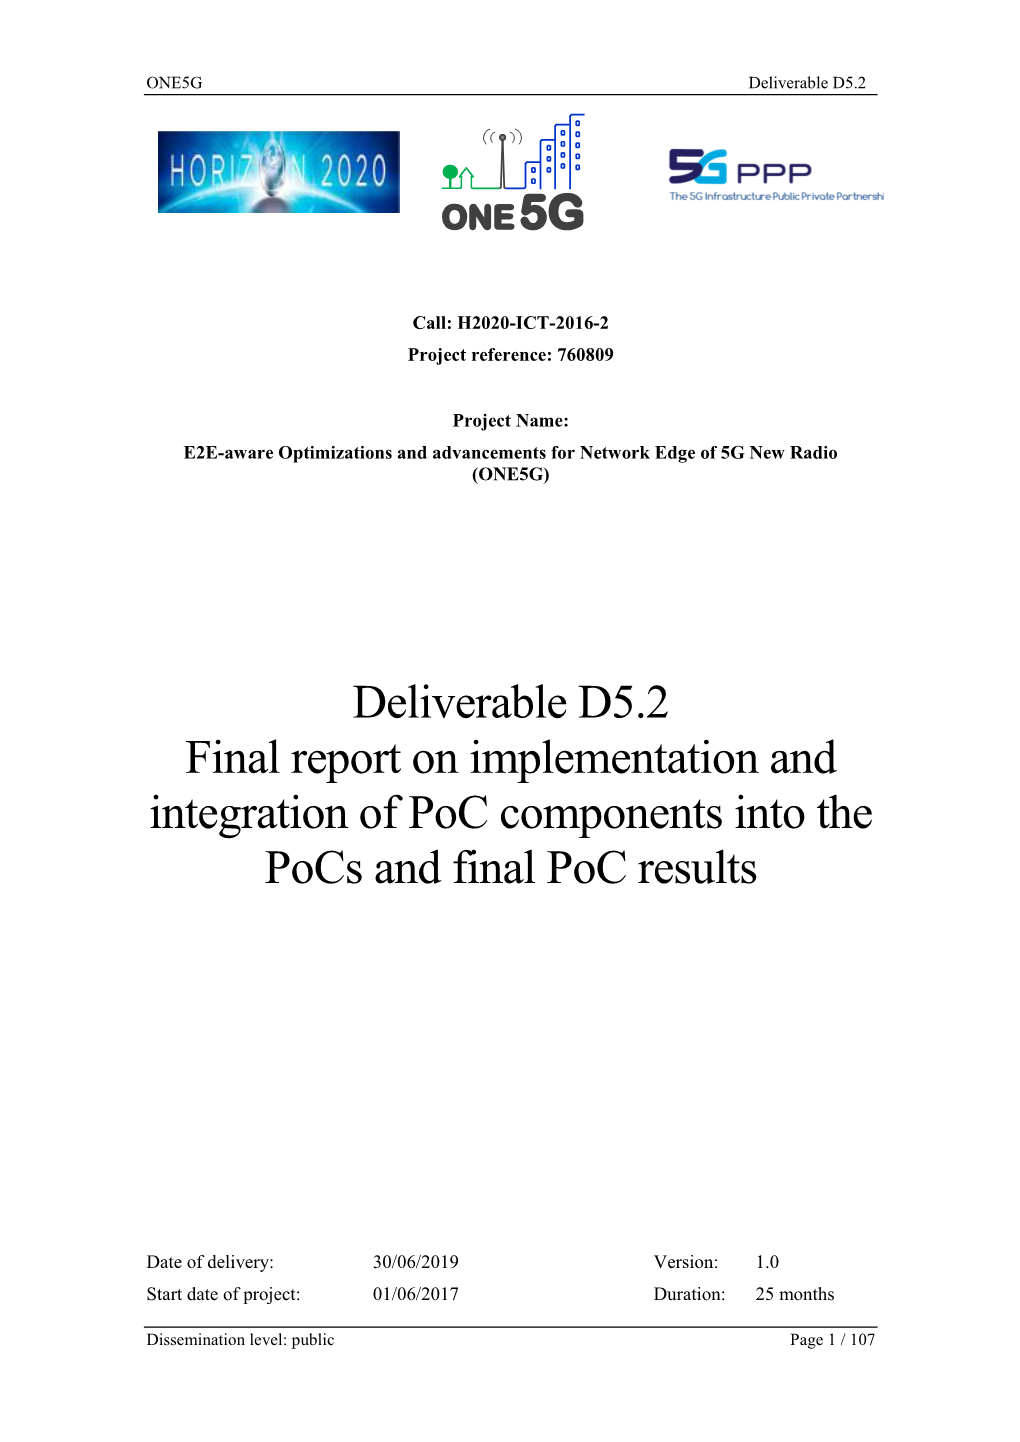 Deliverable D5.2 Final Report on Implementation and Integration of Poc Components Into the Pocs and Final Poc Results